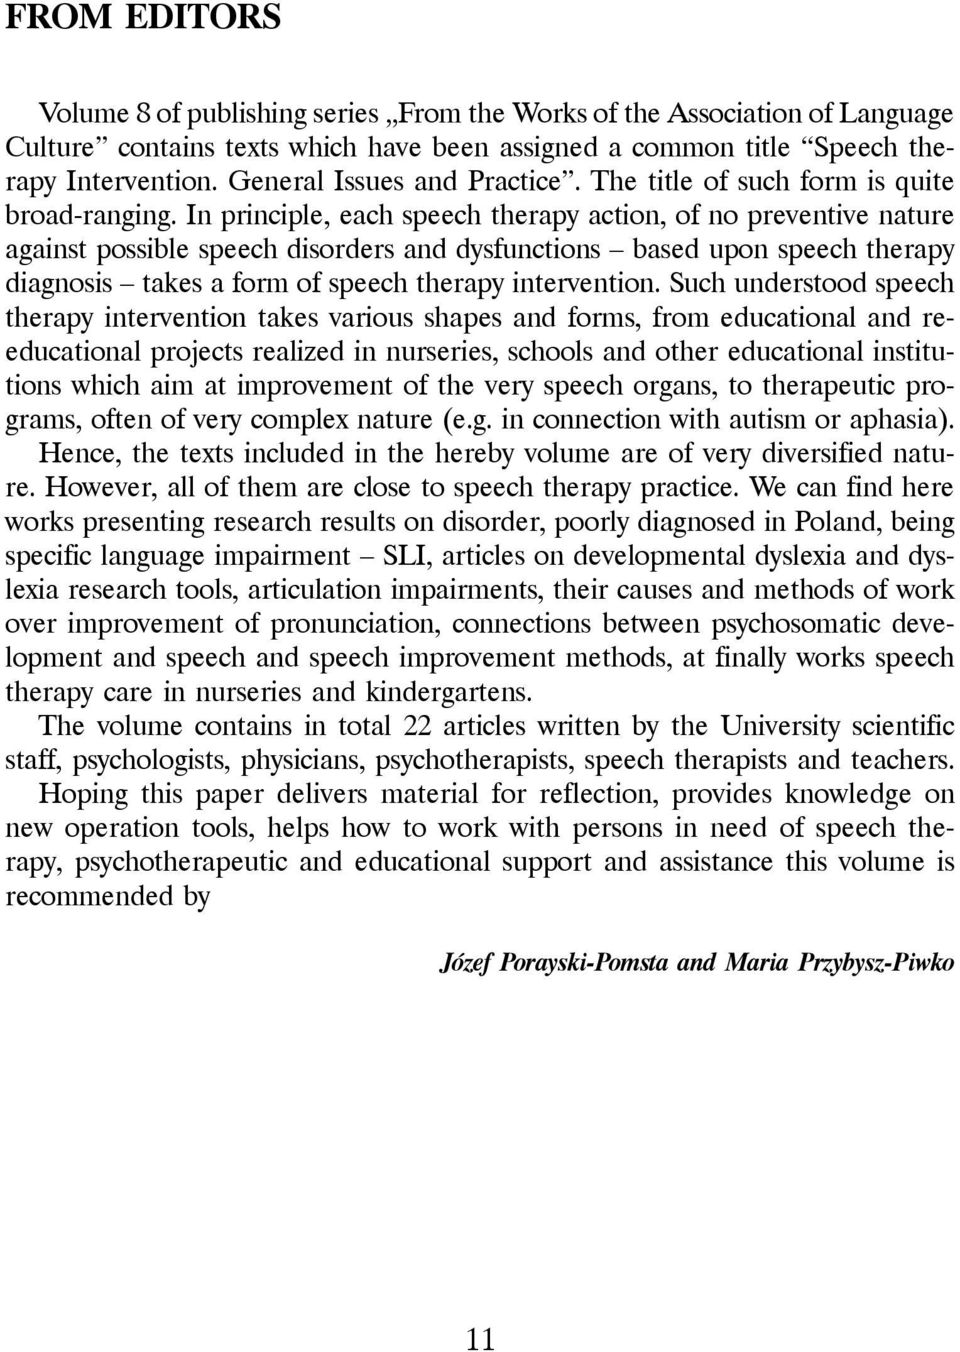 In principle, each speech therapy action, of no preventive nature against possible speech disorders and dysfunctions based upon speech therapy diagnosis takes a form of speech therapy intervention.